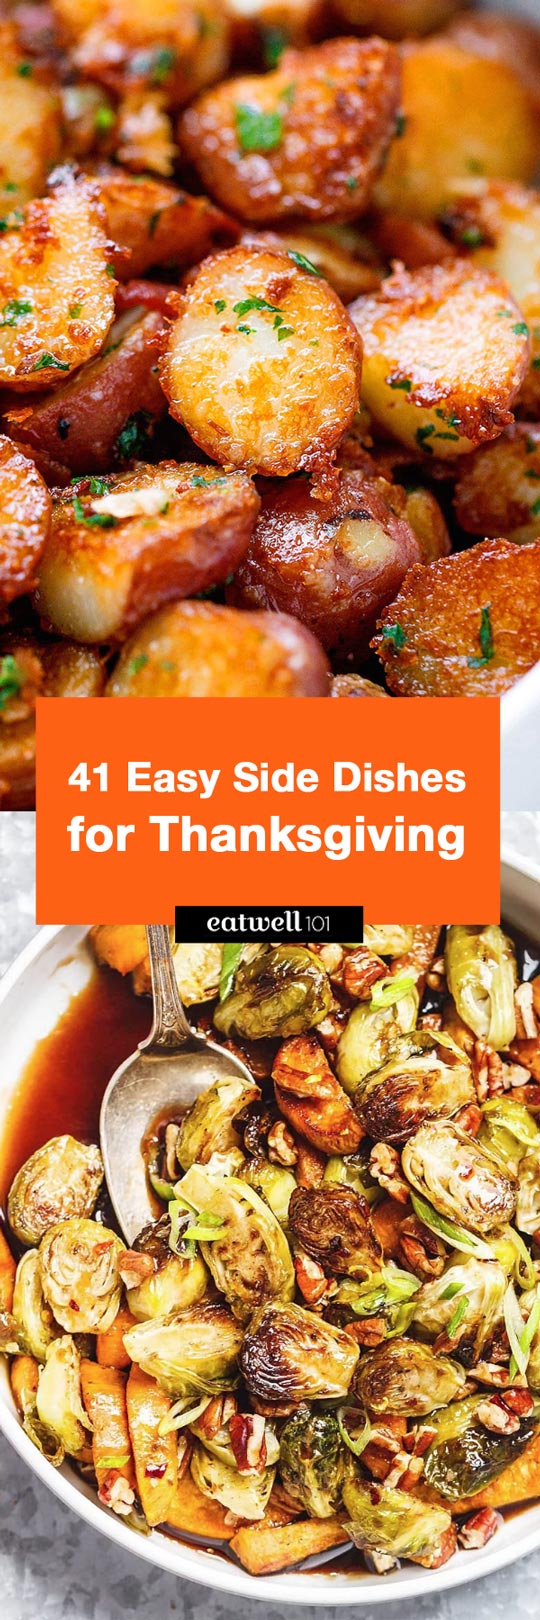 41 Simple Side Dishes for your Thanksgiving Dinner - #thanksgiving #side-dish #recipes #eatwell101 - These easy Thanksgiving Side Dishes will shine on your table on the big day!